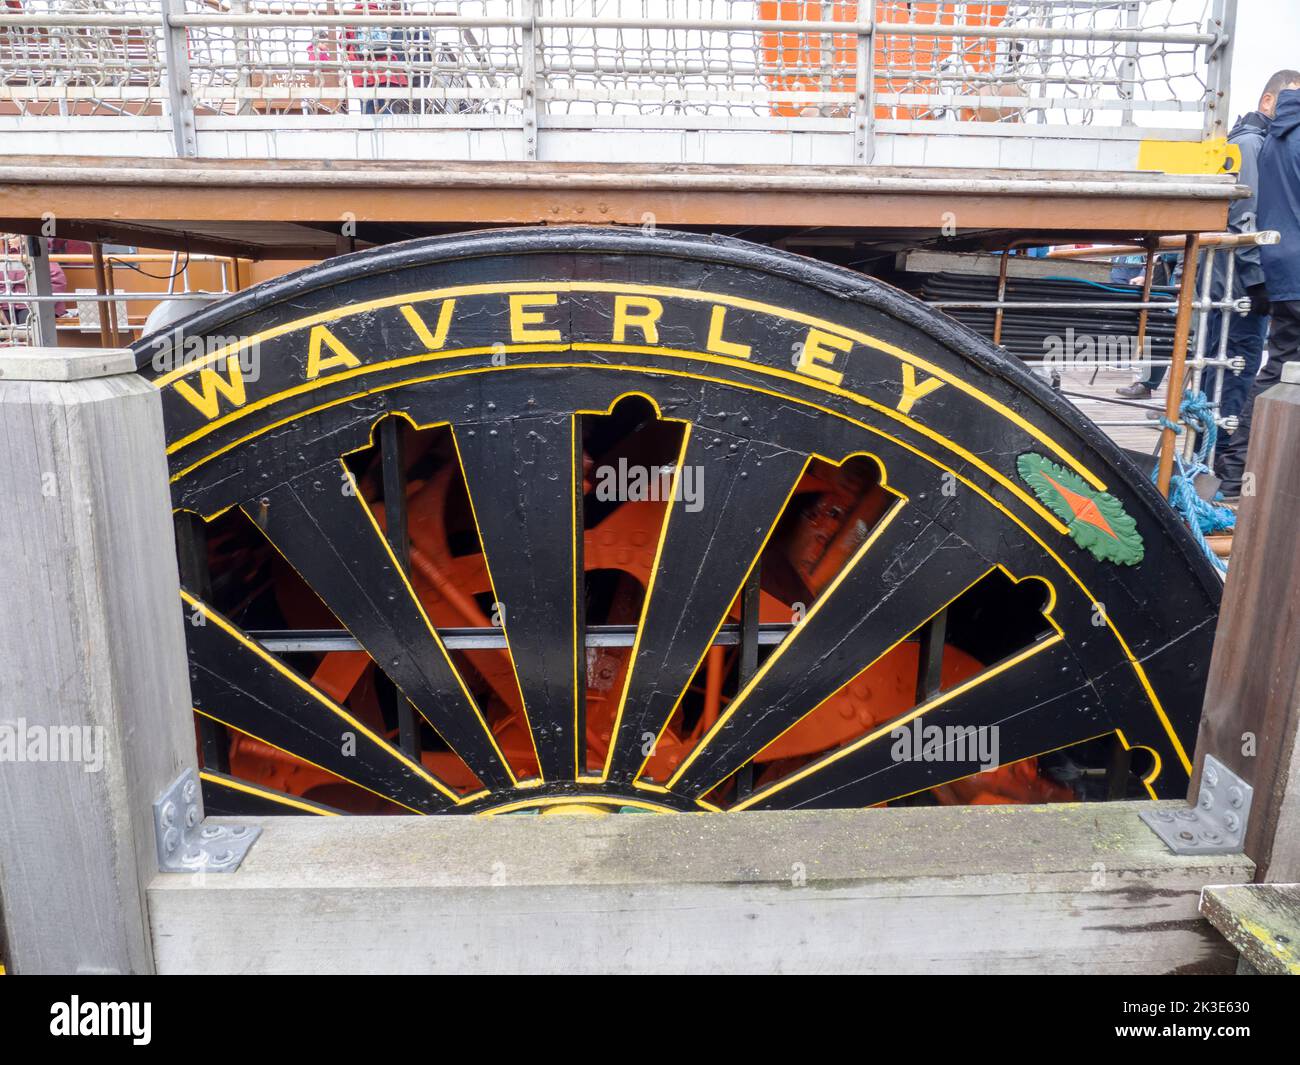 The Waverley, the UK's only seagoing paddle steamer, in Yarmouth, Isle of White, UK. Stock Photo